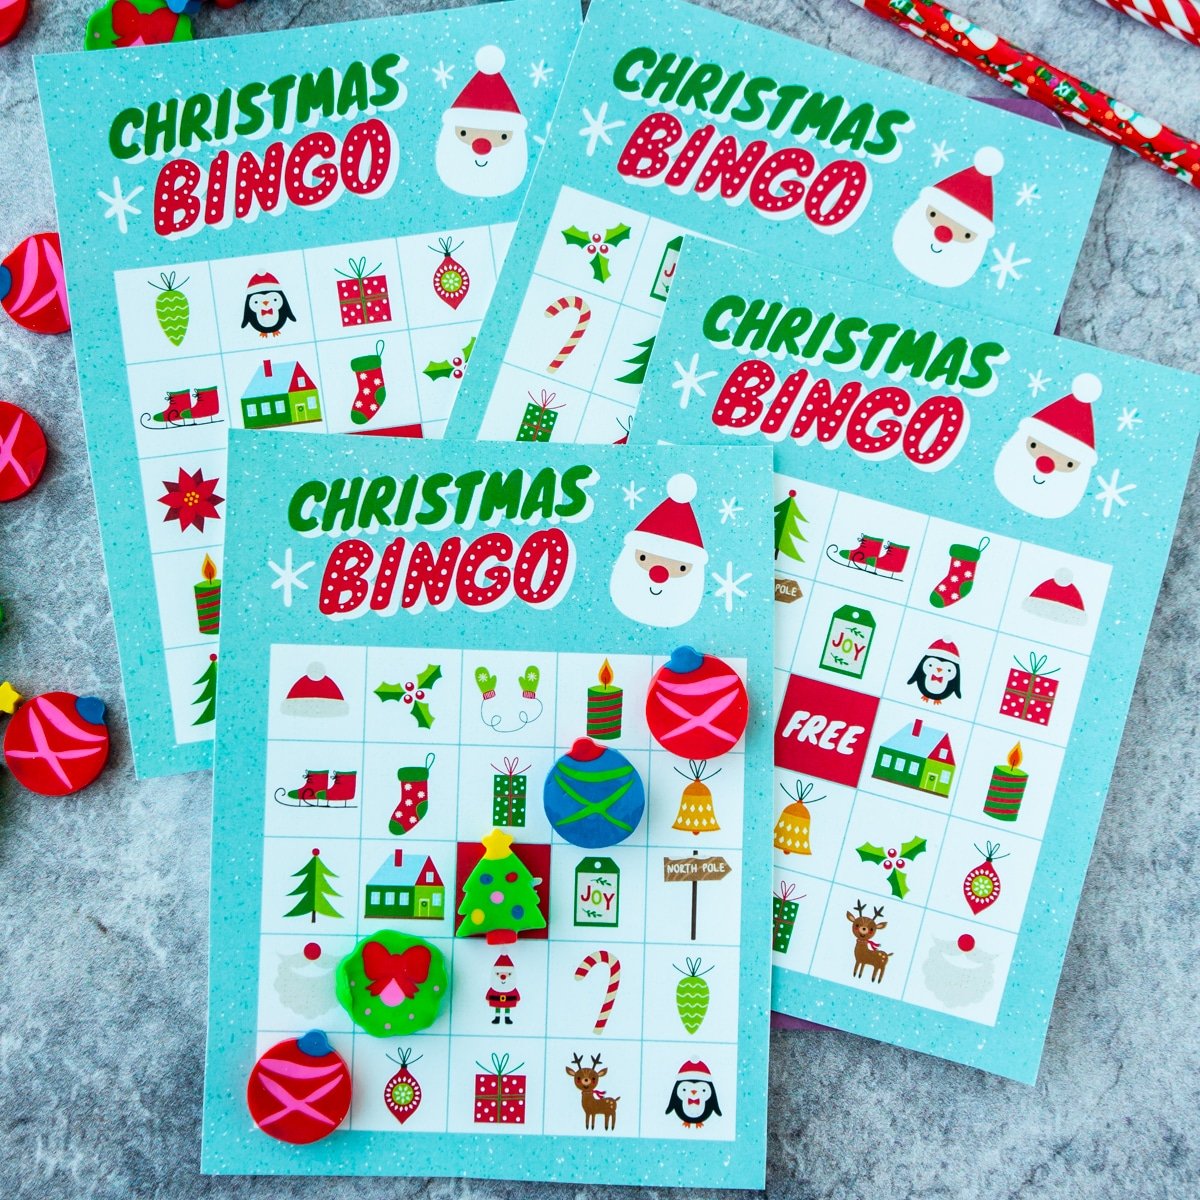 Four Christmas bingo cards stacked on top of each other